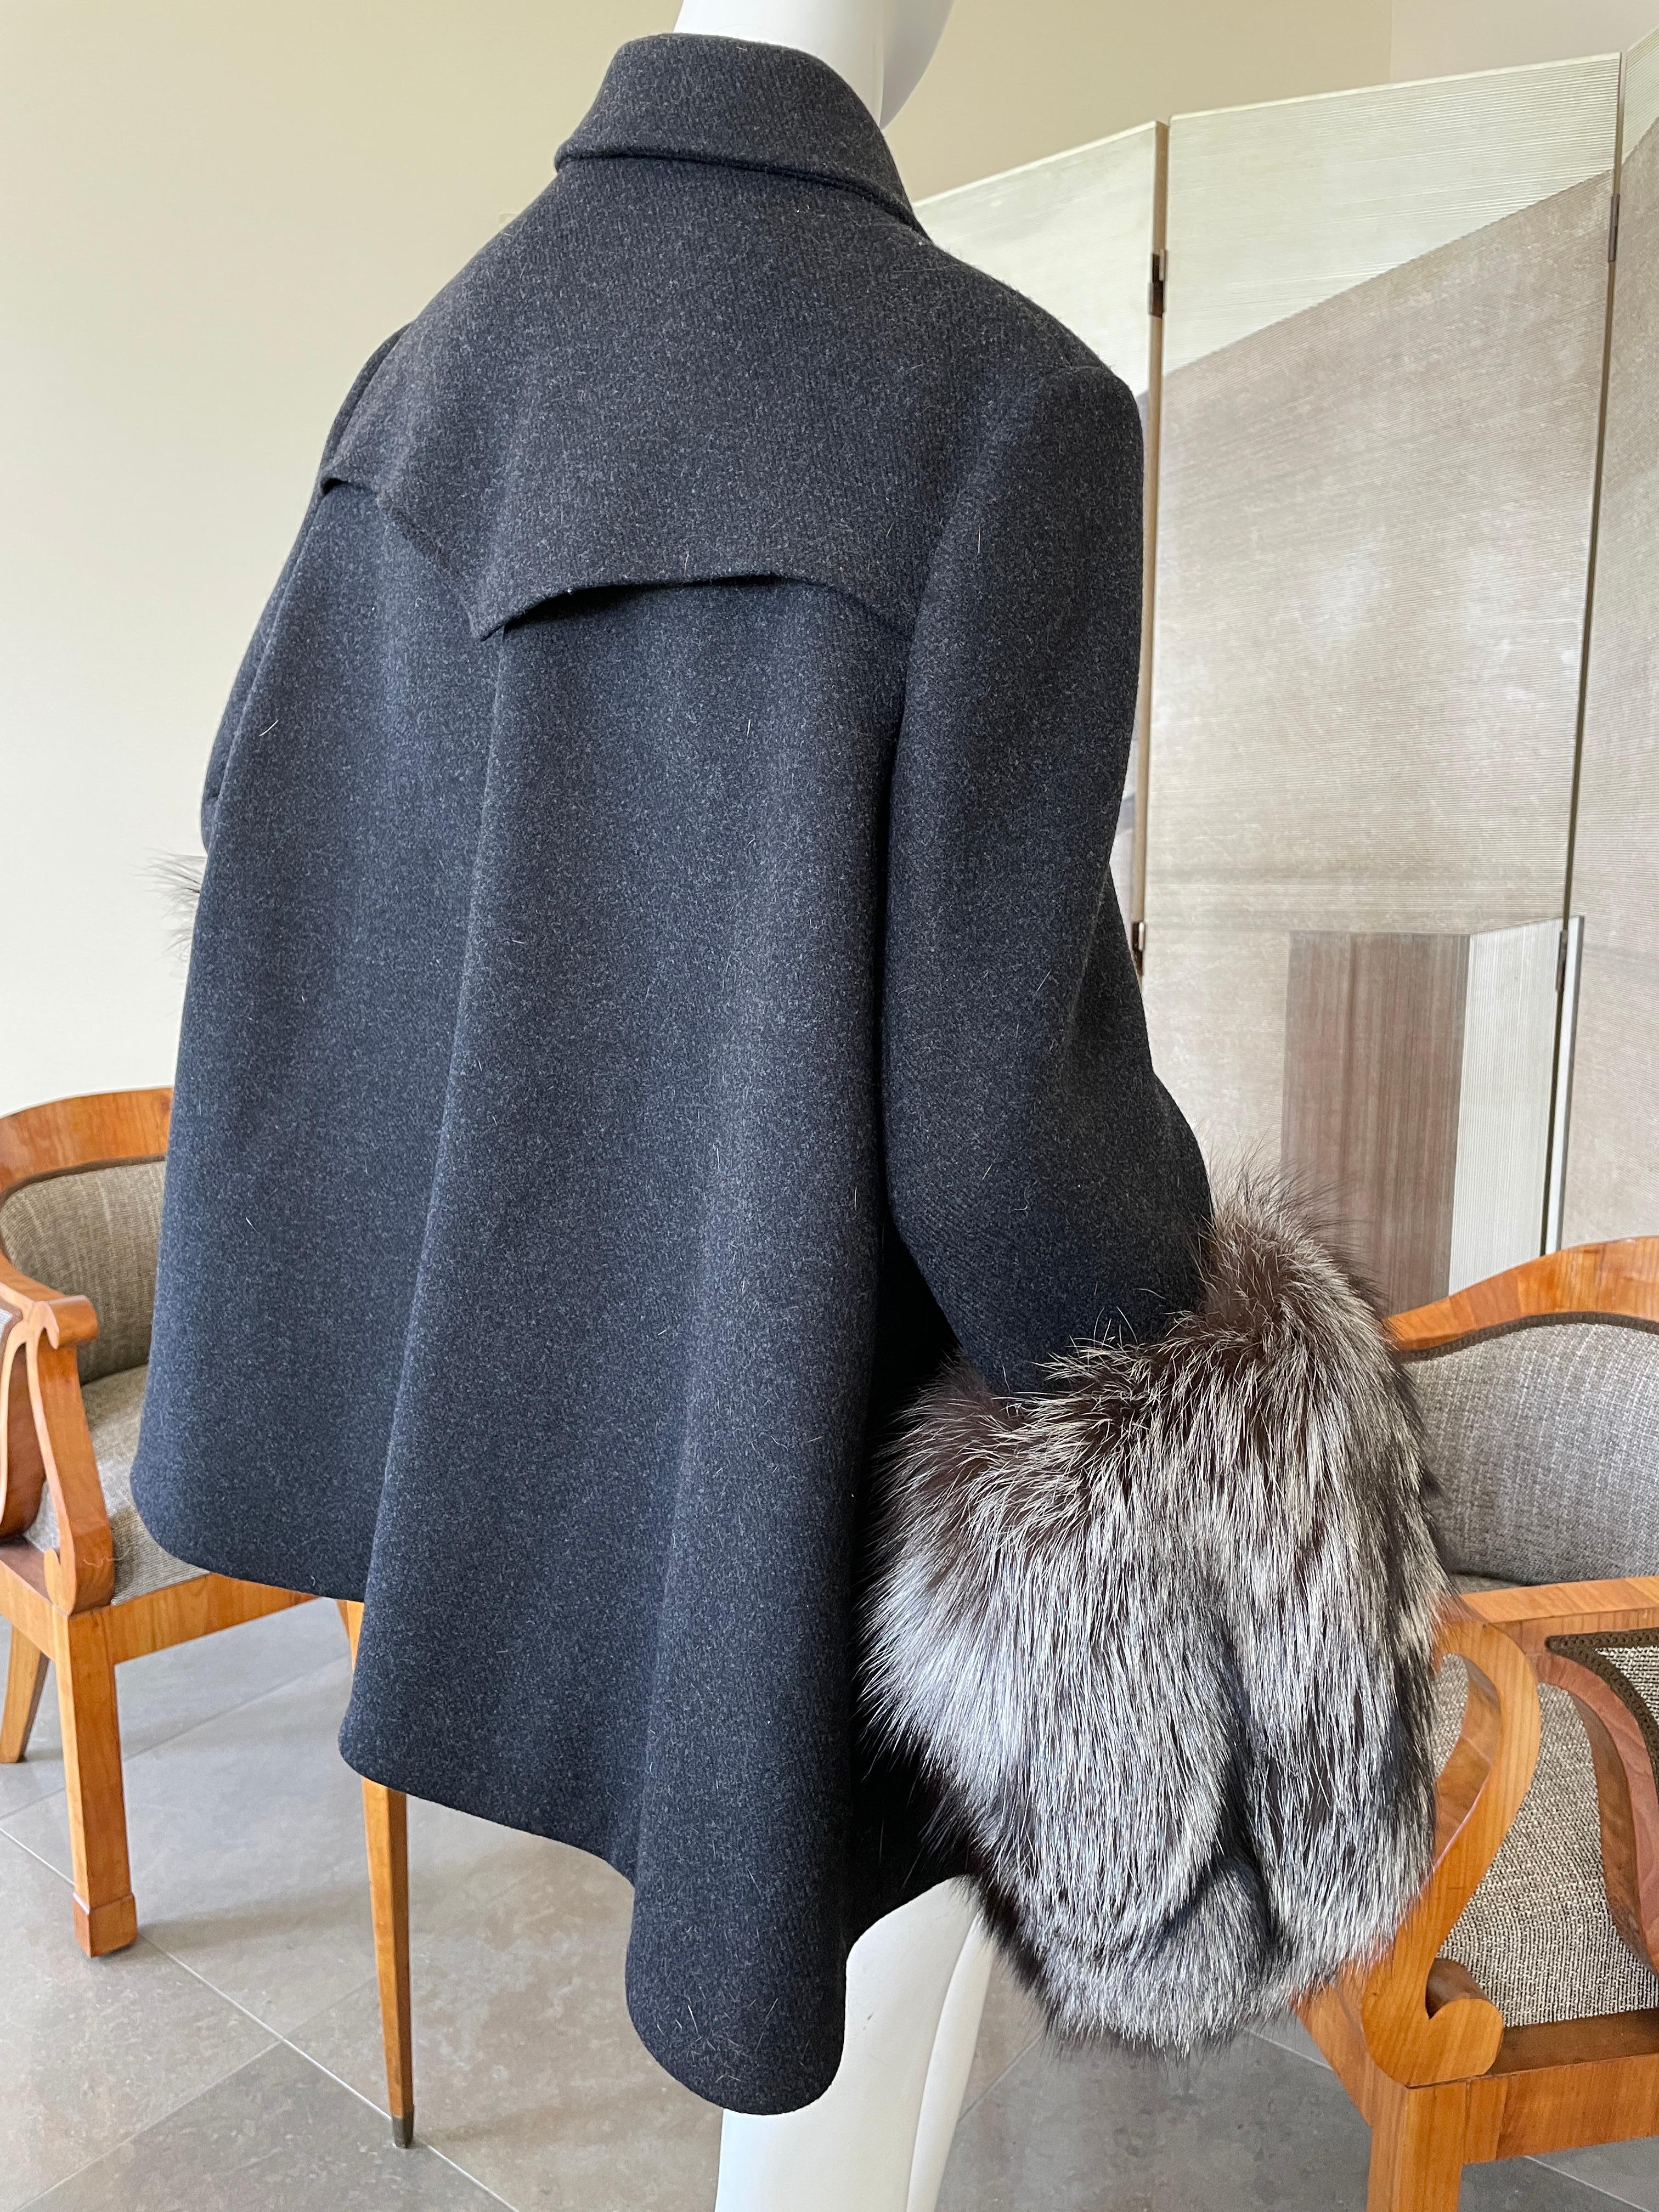 Christian Dior by Gianfranco Ferre Gray Peacoat with Fox Fur Cuffs For Sale 3